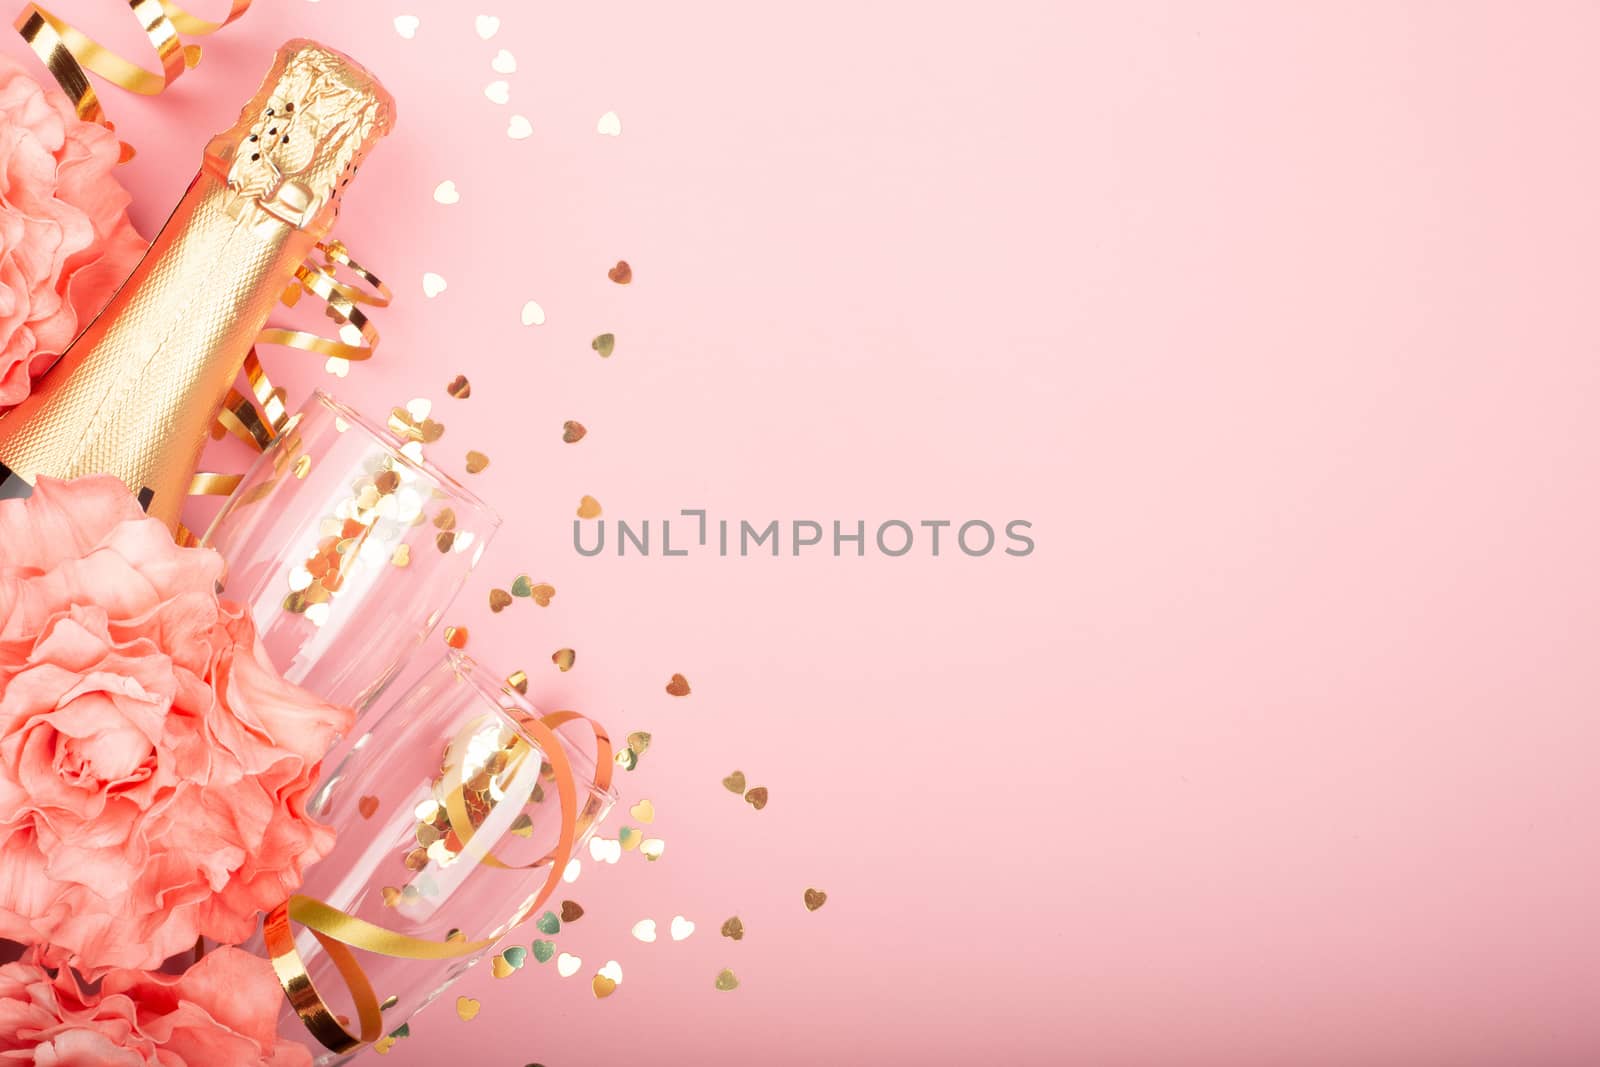 Valentines day champagne bottle flute glasses golden confetti hearts rose flowers and serpentine on pink background with copy space for text